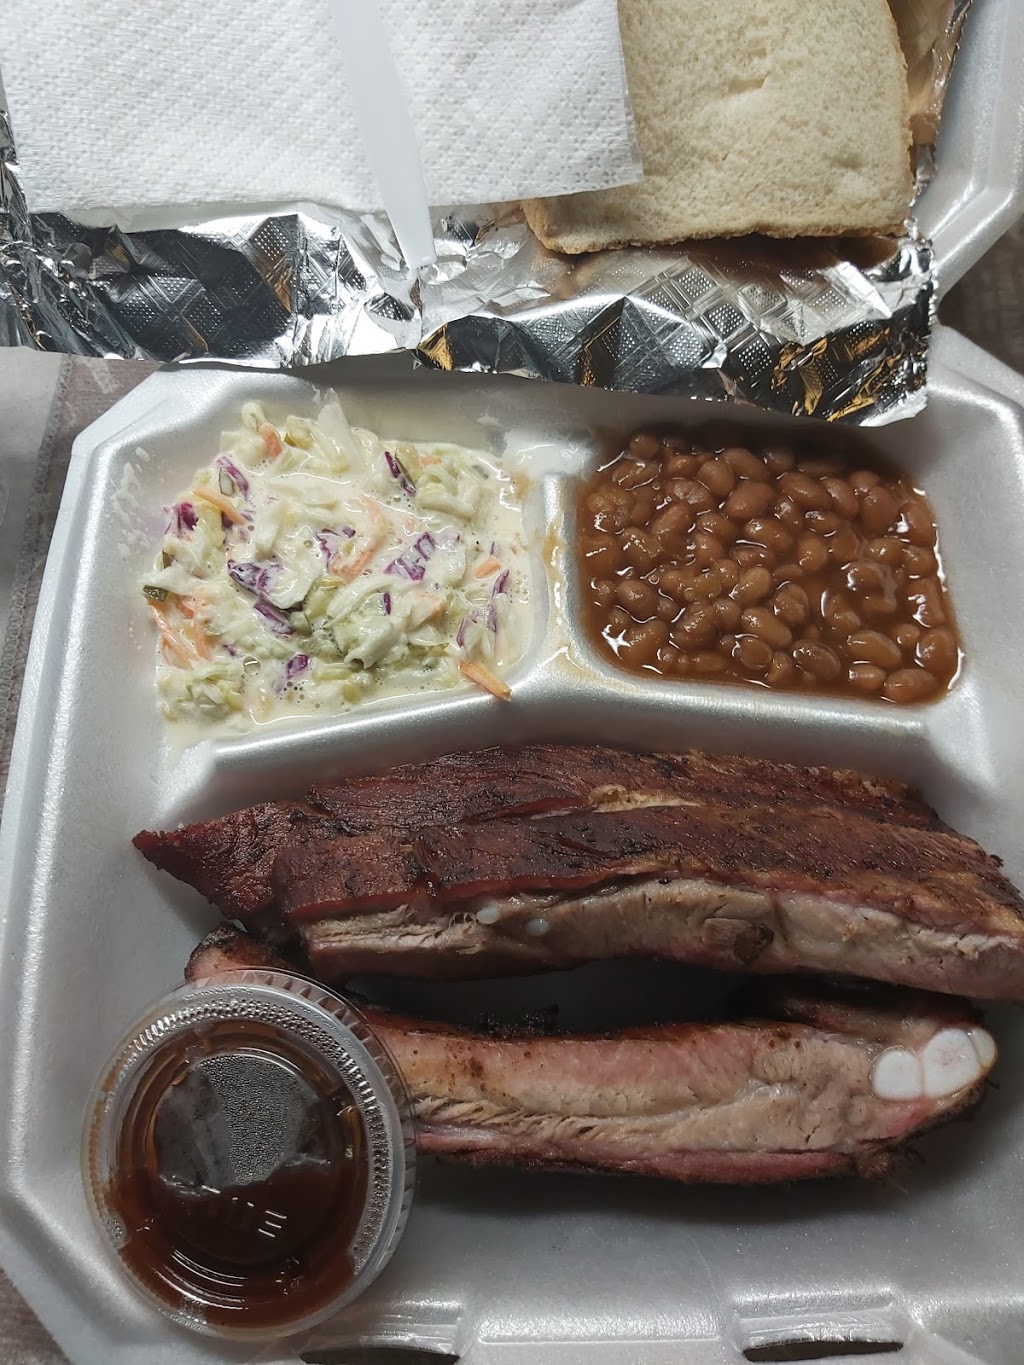 Jbs Barbecue | restaurant | 3064 8th St, Meridian, MS 39301, USA | 6014902141 OR +1 601-490-2141